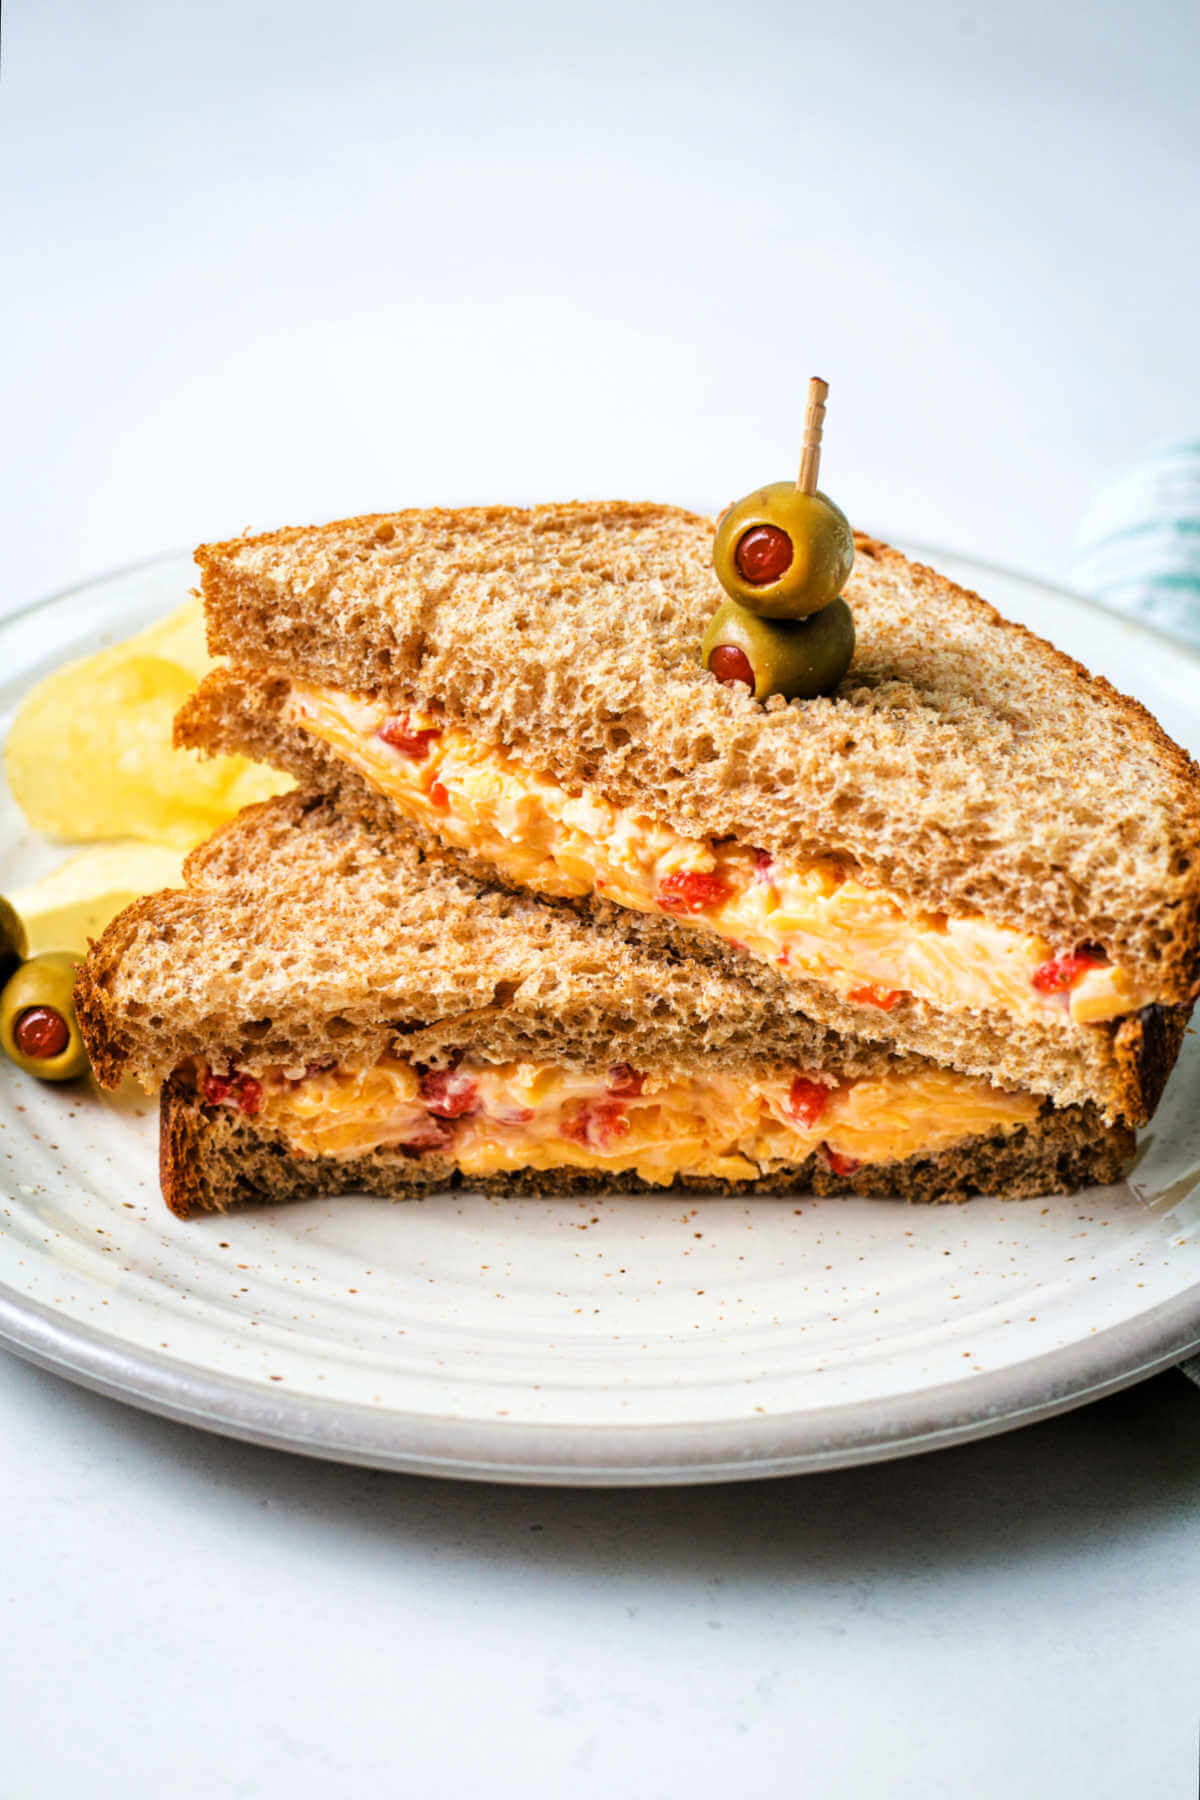 a pimento cheese sandwich cut in half on a plate with olives and potato chips.